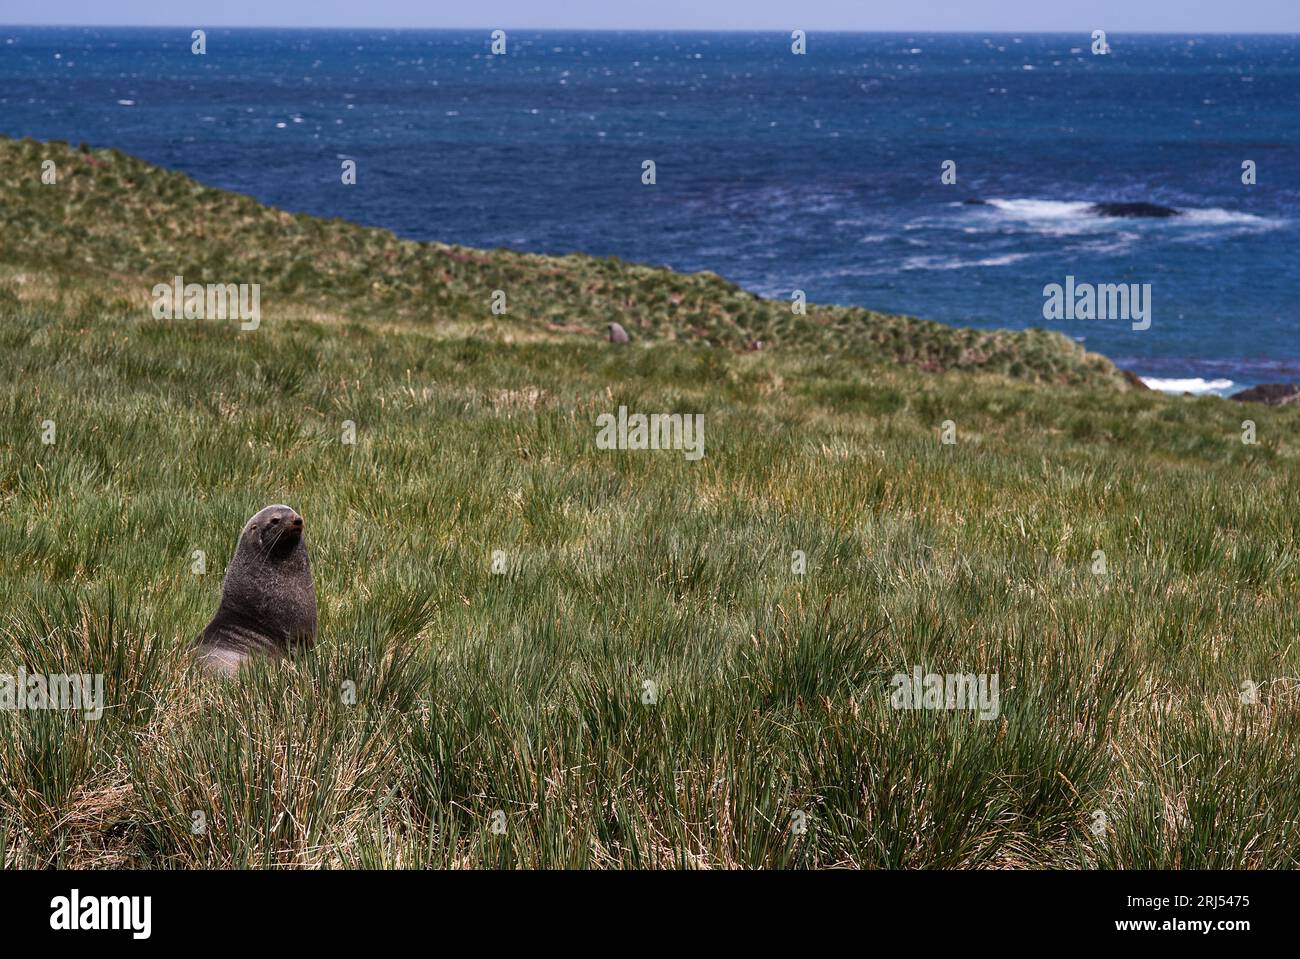 A fur seal in tussock grass Stock Photo - Alamy